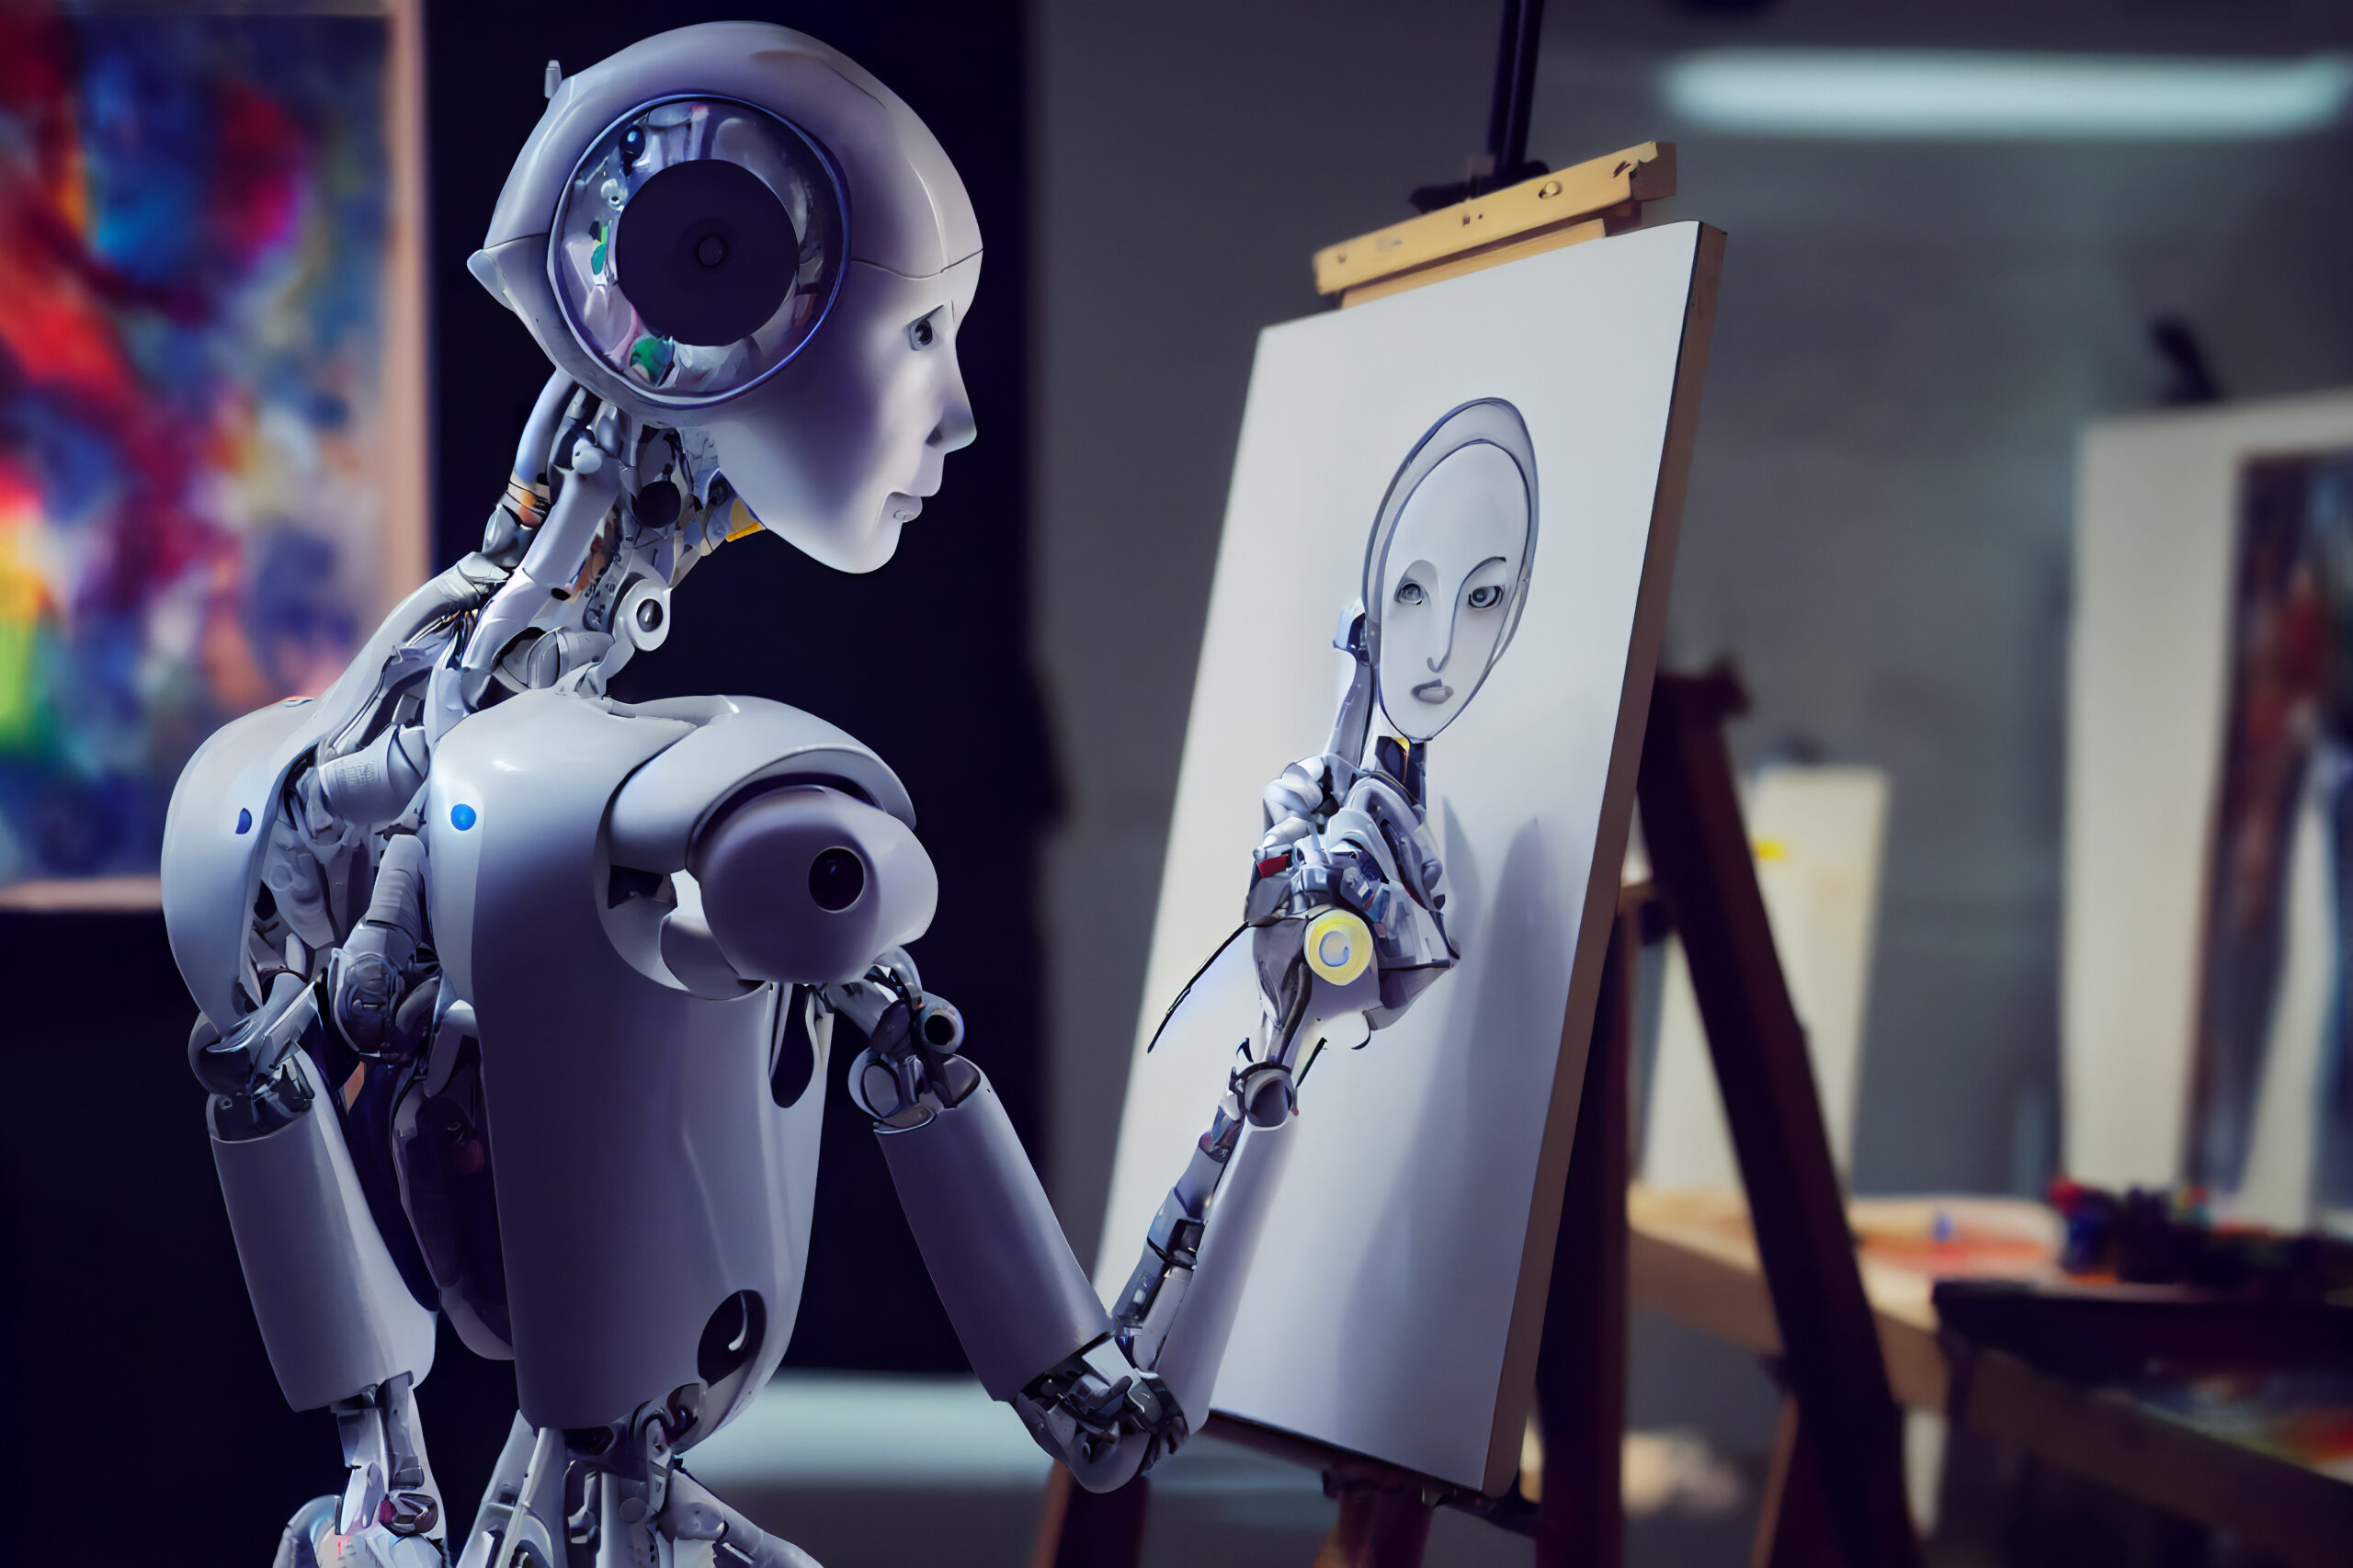 AI “Art” Can't Be Copyrighted, Judge Rules | Mind Matters